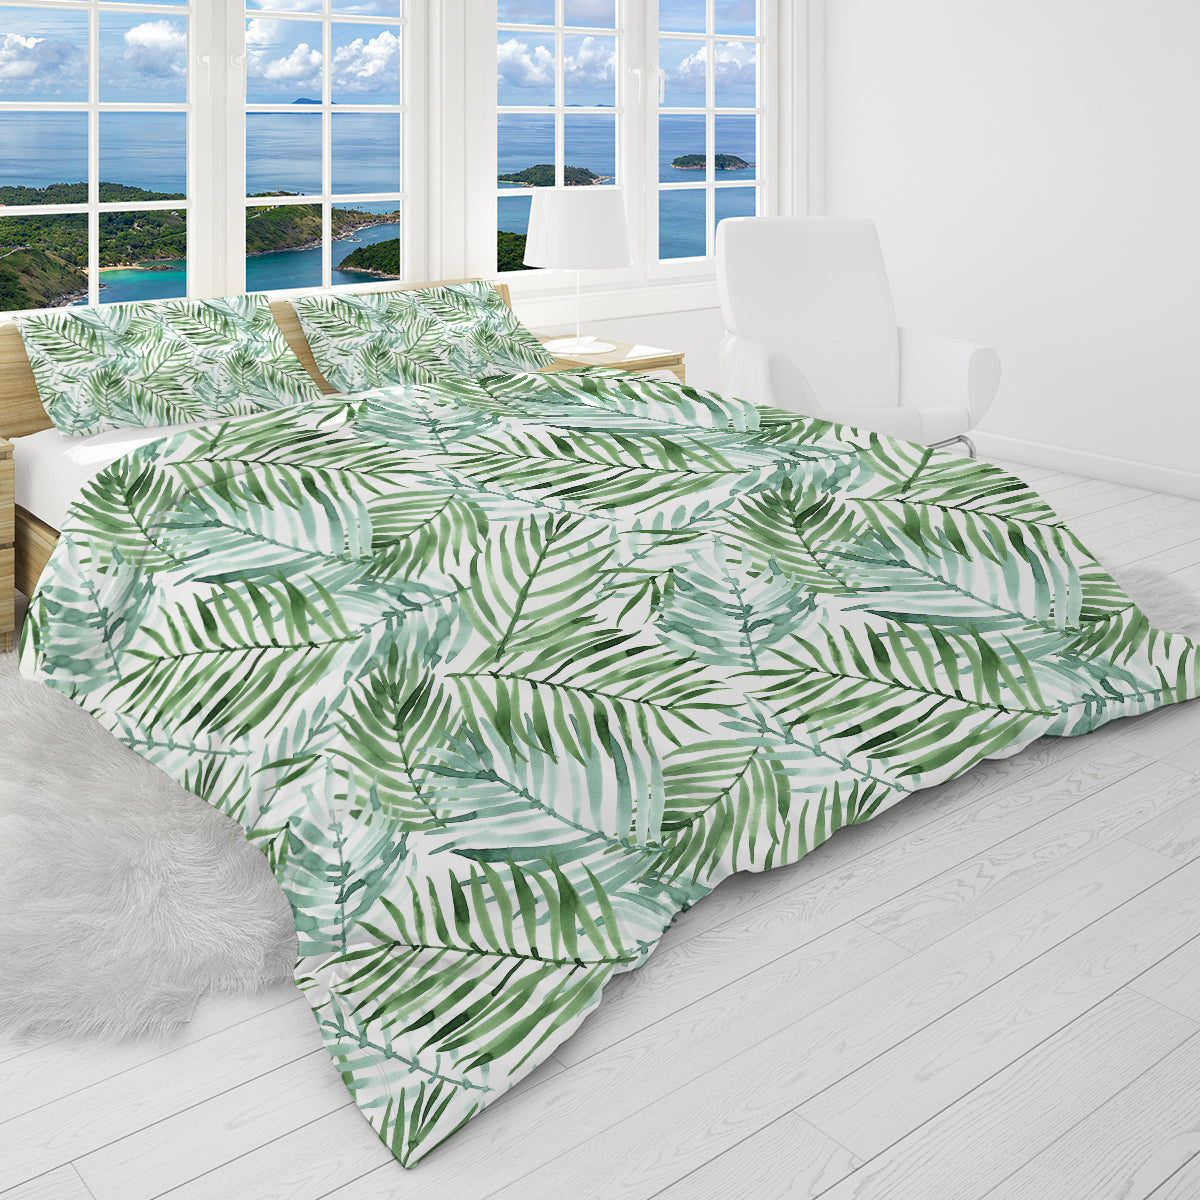 Tropical Palm Leaves Reversible Bedcover Set